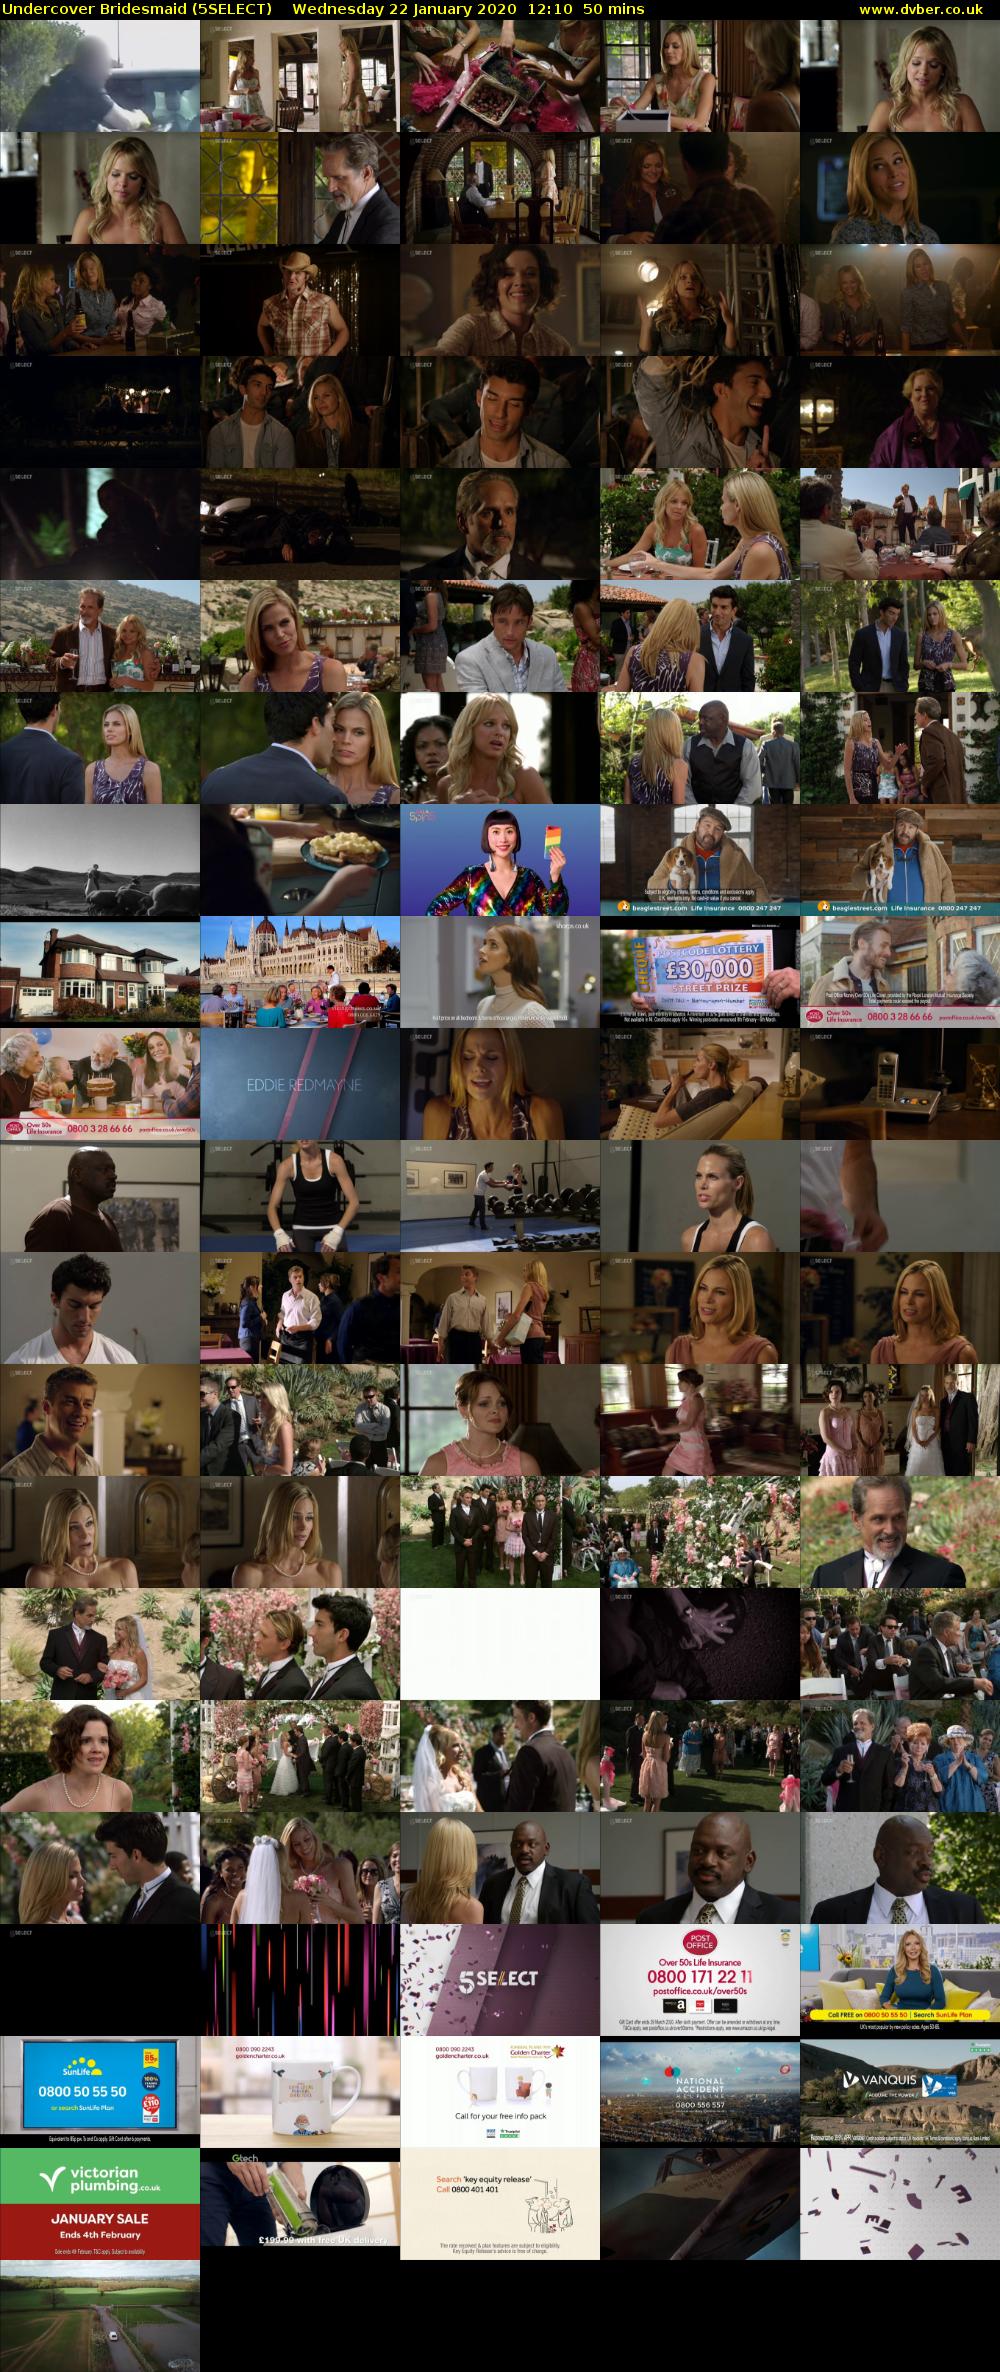 Undercover Bridesmaid (5SELECT) Wednesday 22 January 2020 12:10 - 13:00